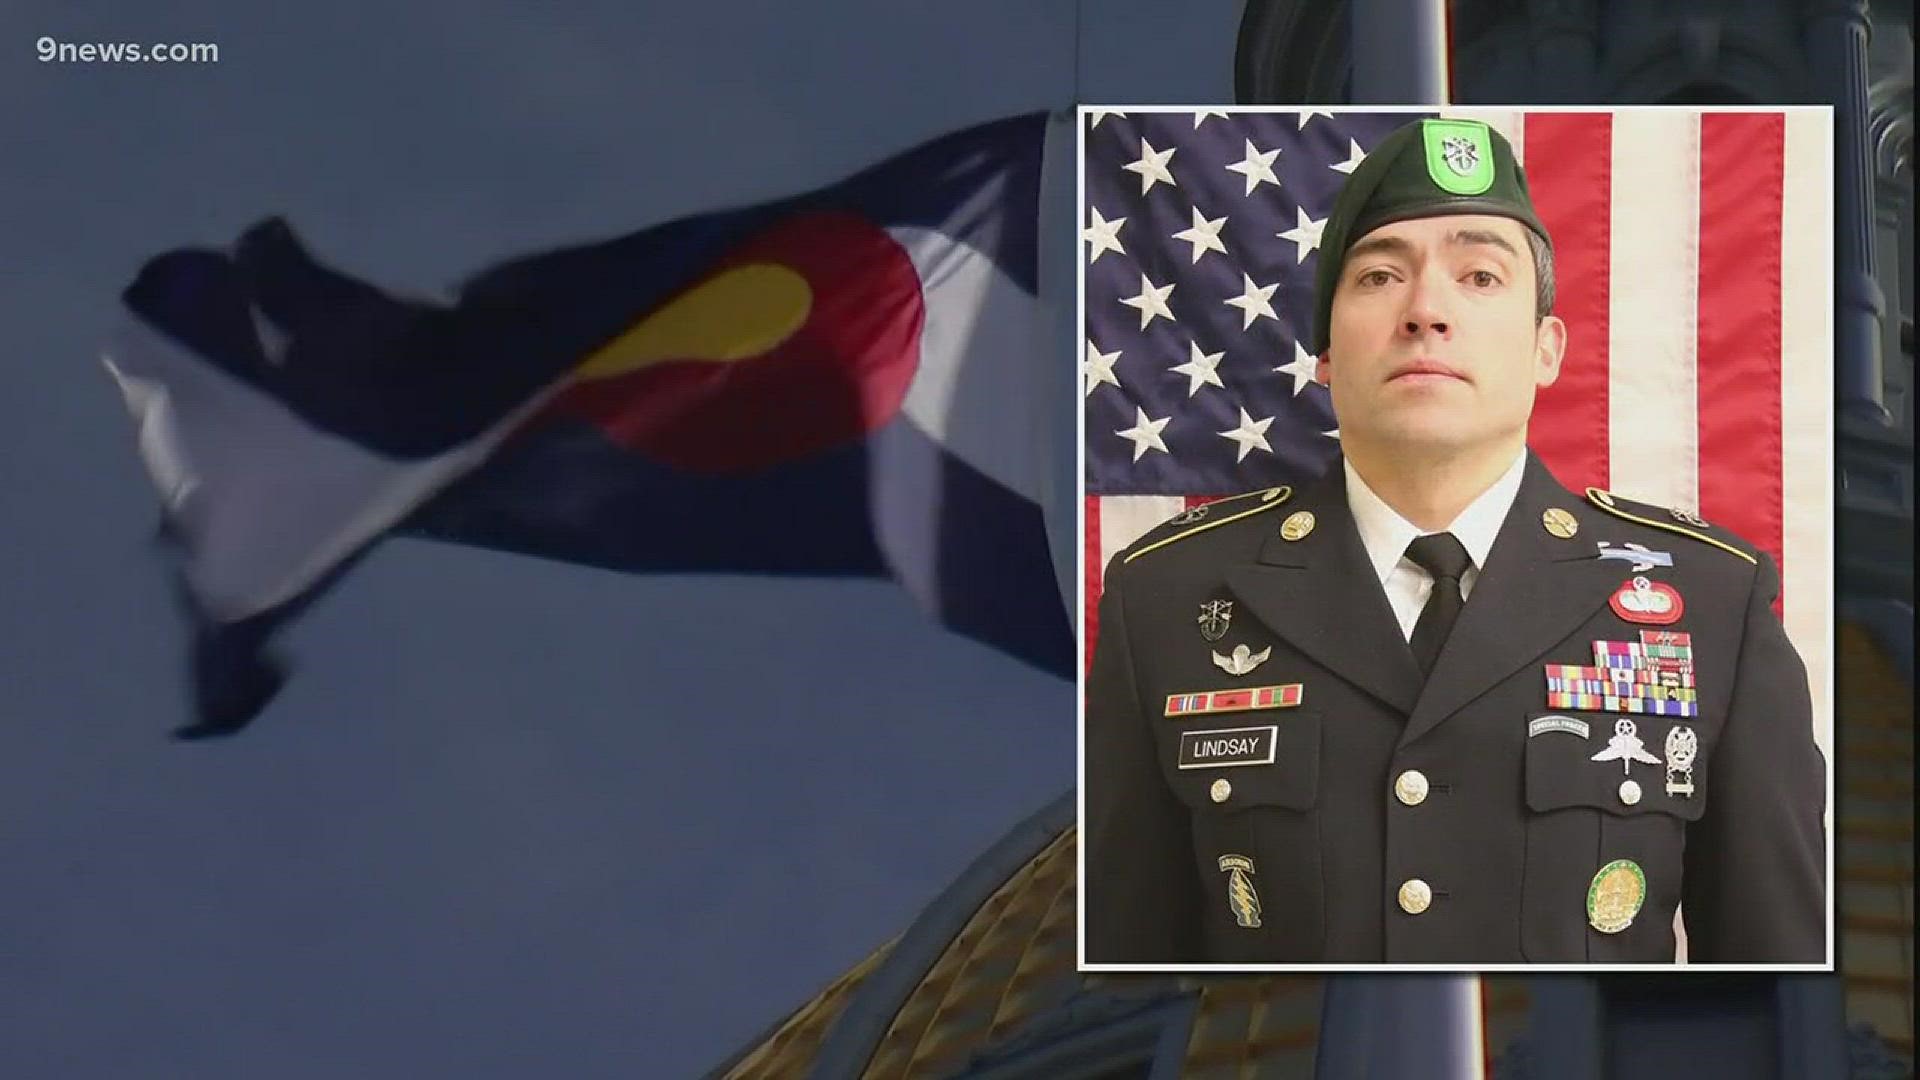 The body of 33-year-old Sergeant 1st Class Will Lindsay arrived in Colorado Springs on Wednesday afternoon.